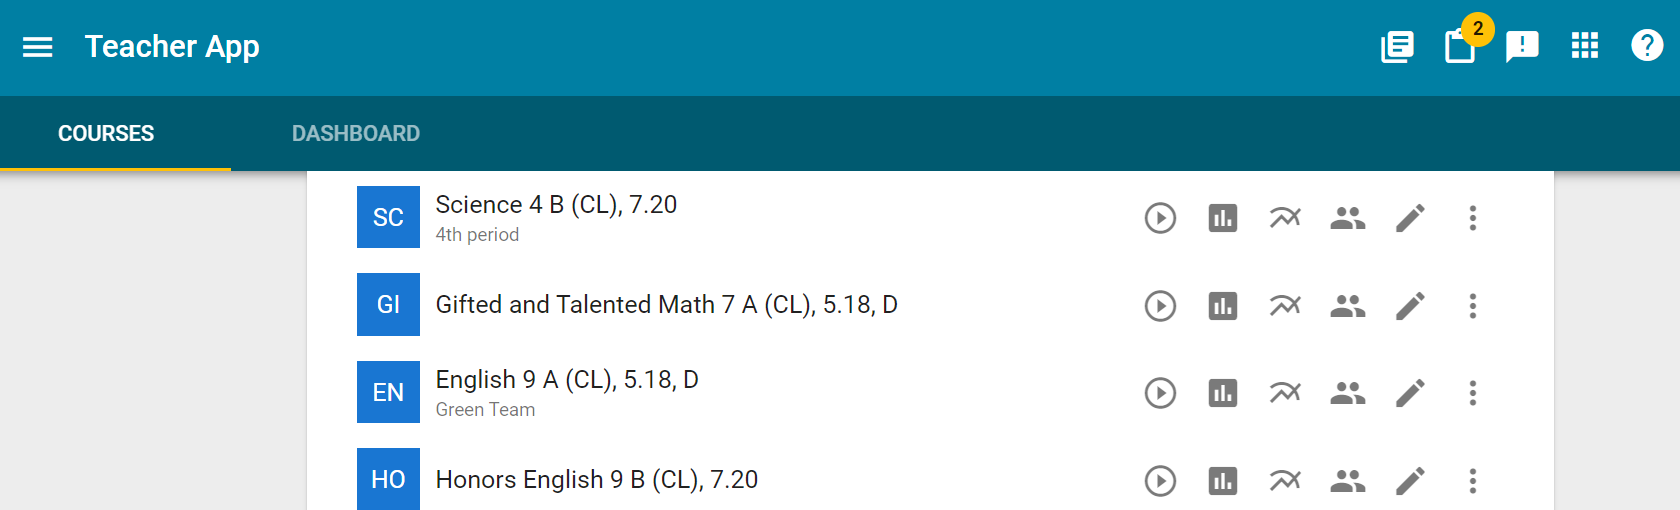 Image of the courses tab in the teacher app, displaying several course cards.